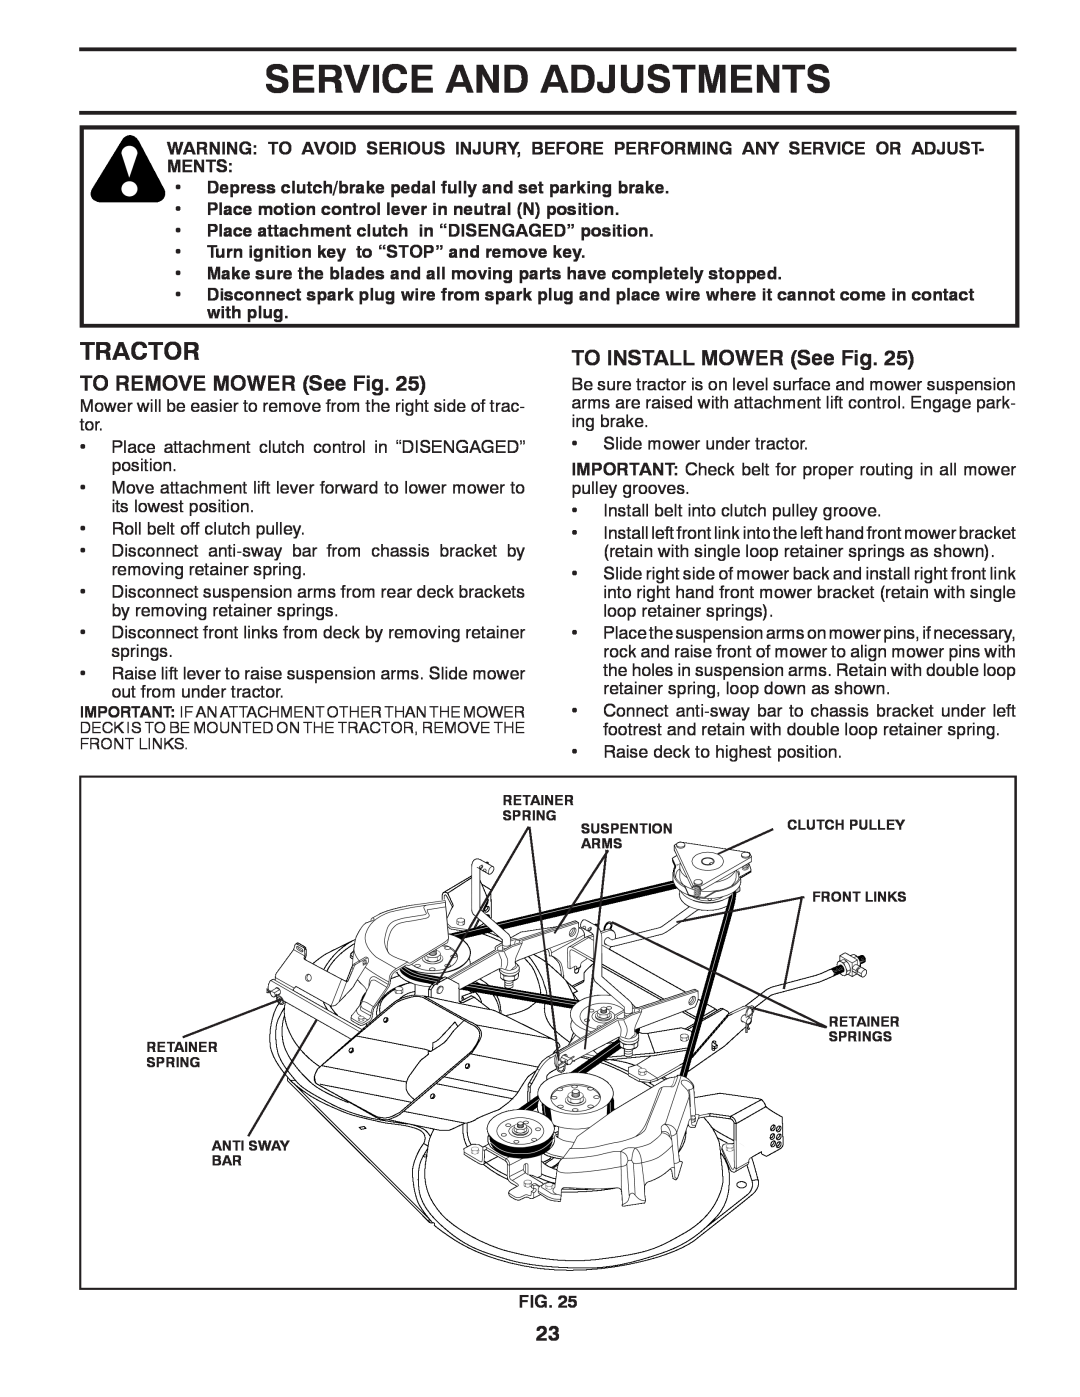 Husqvarna CTH2036 owner manual Service And Adjustments, TO REMOVE MOWER See Fig, TO INSTALL MOWER See Fig, Tractor 